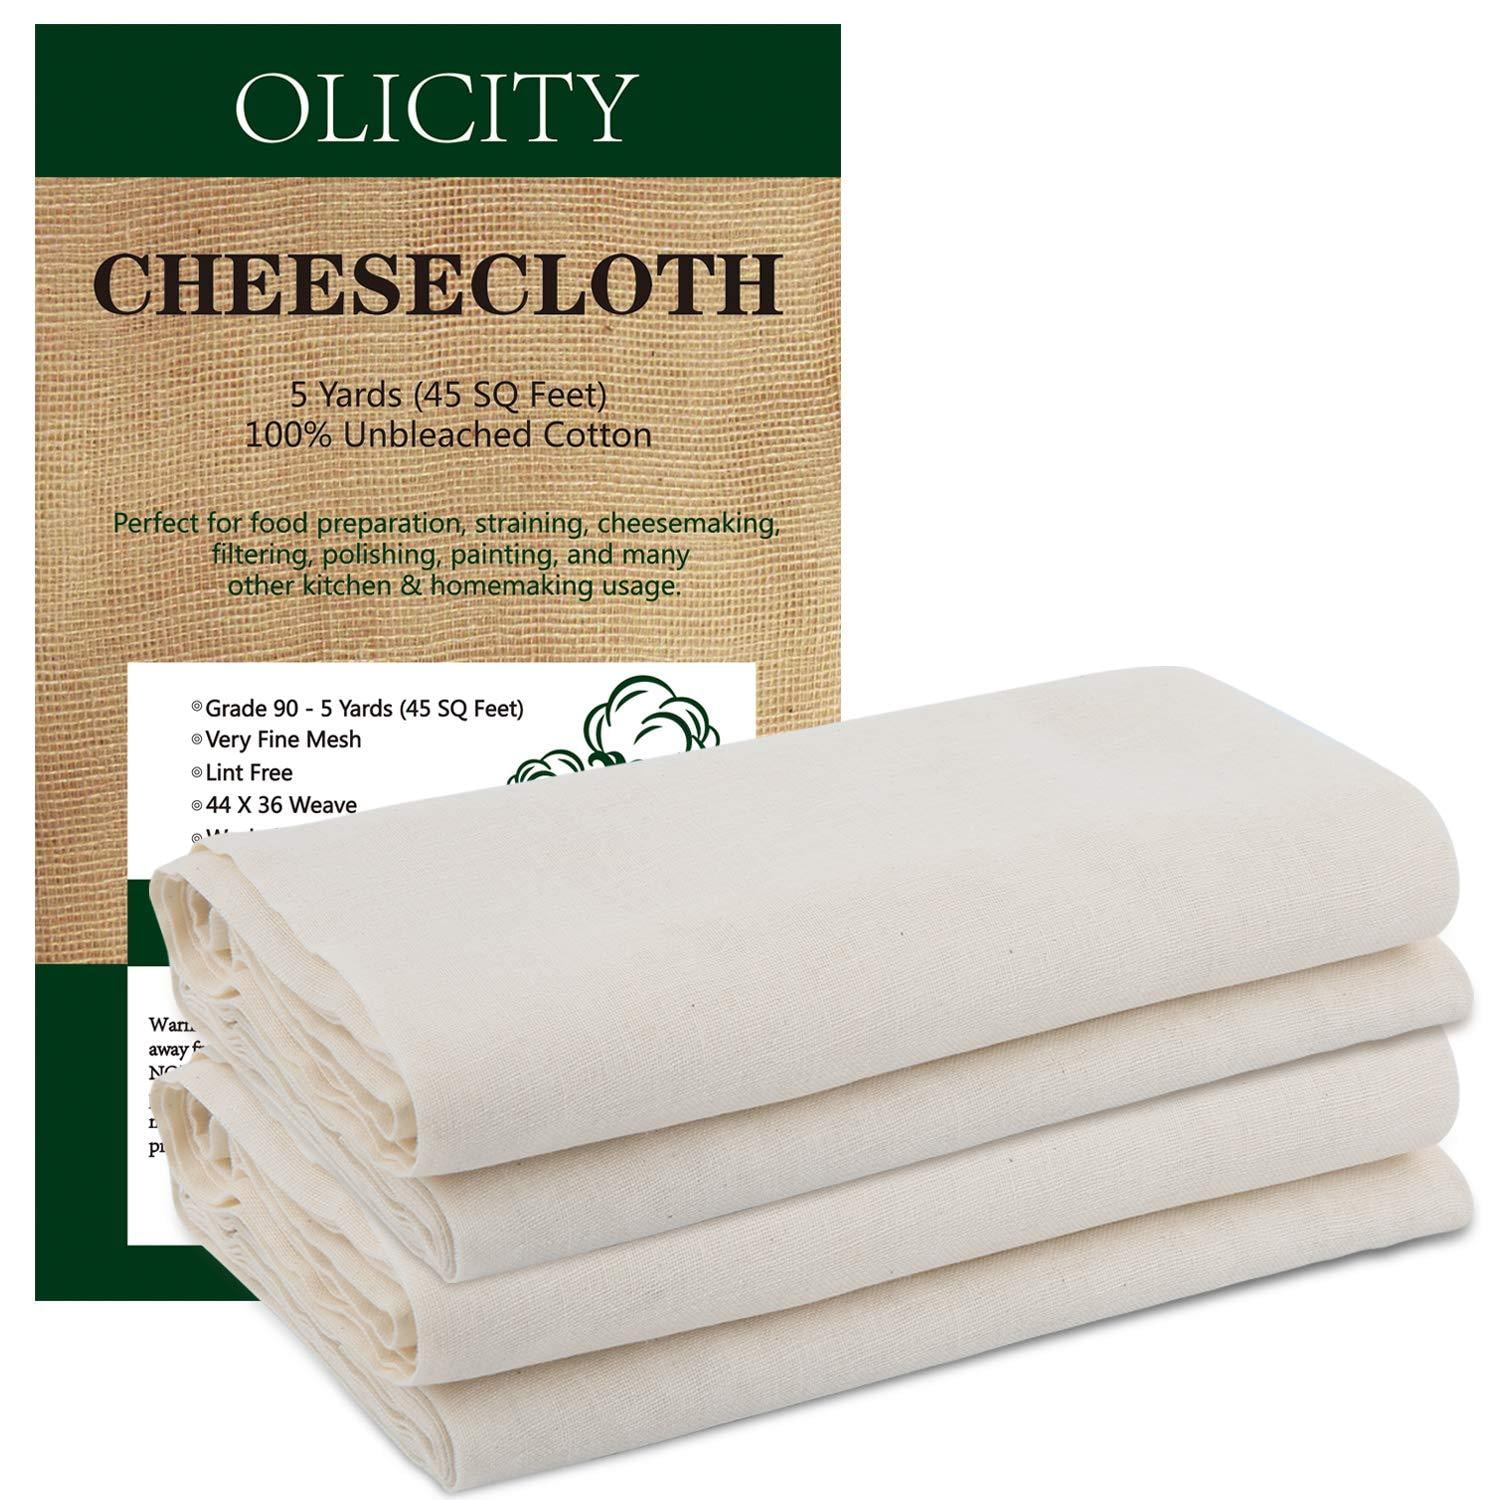 Olicity Cheesecloth, Grade 90, 45 Square Feet, 100% Unbleached